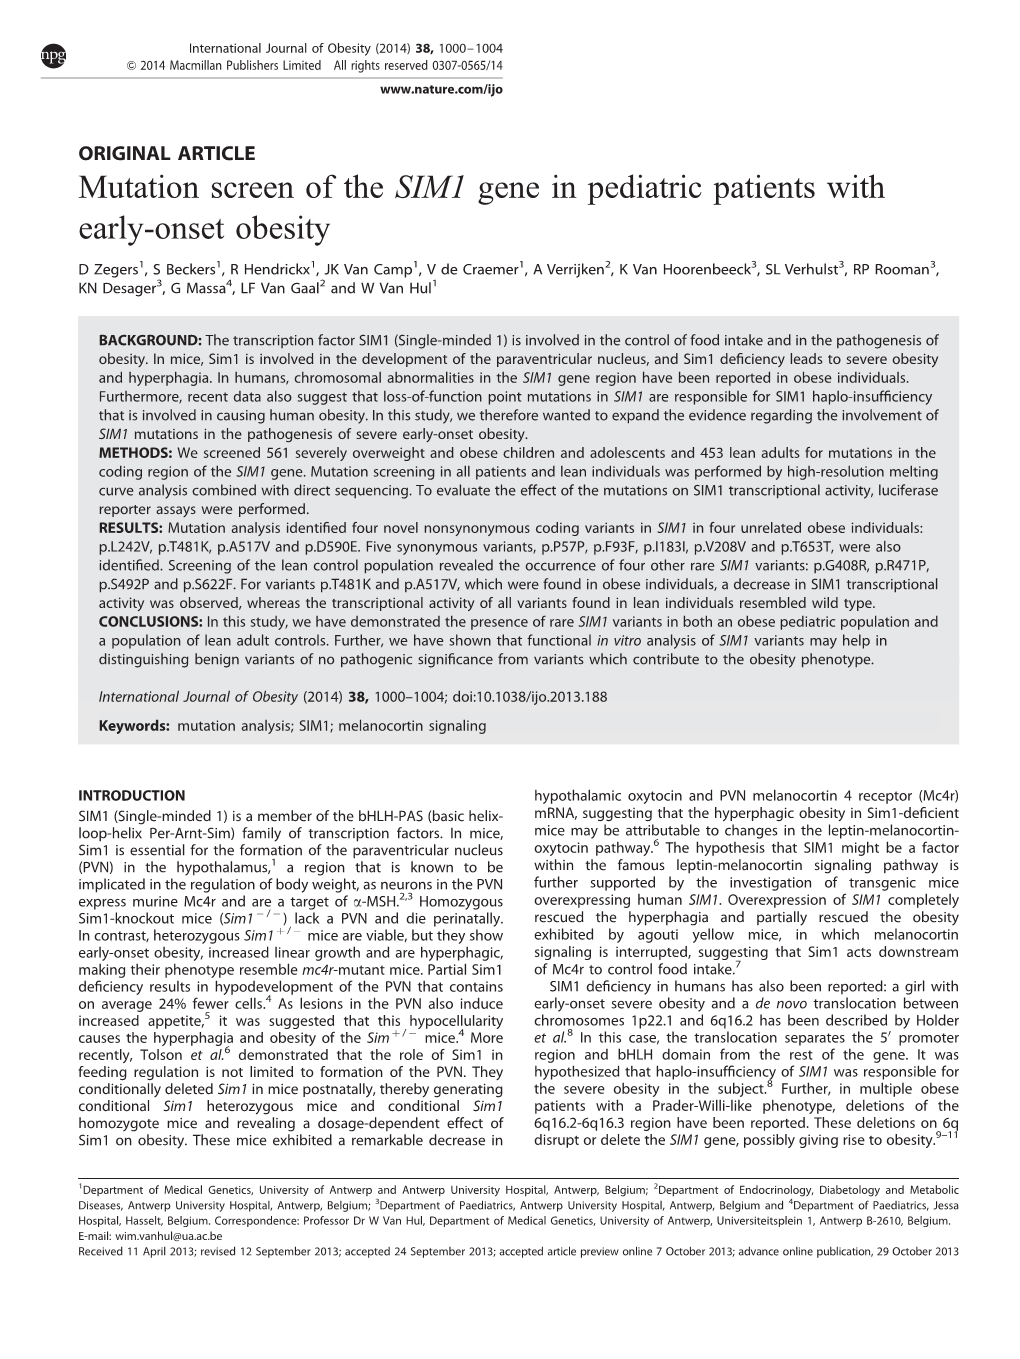 Mutation Screen of the SIM1 Gene in Pediatric Patients with Early-Onset Obesity